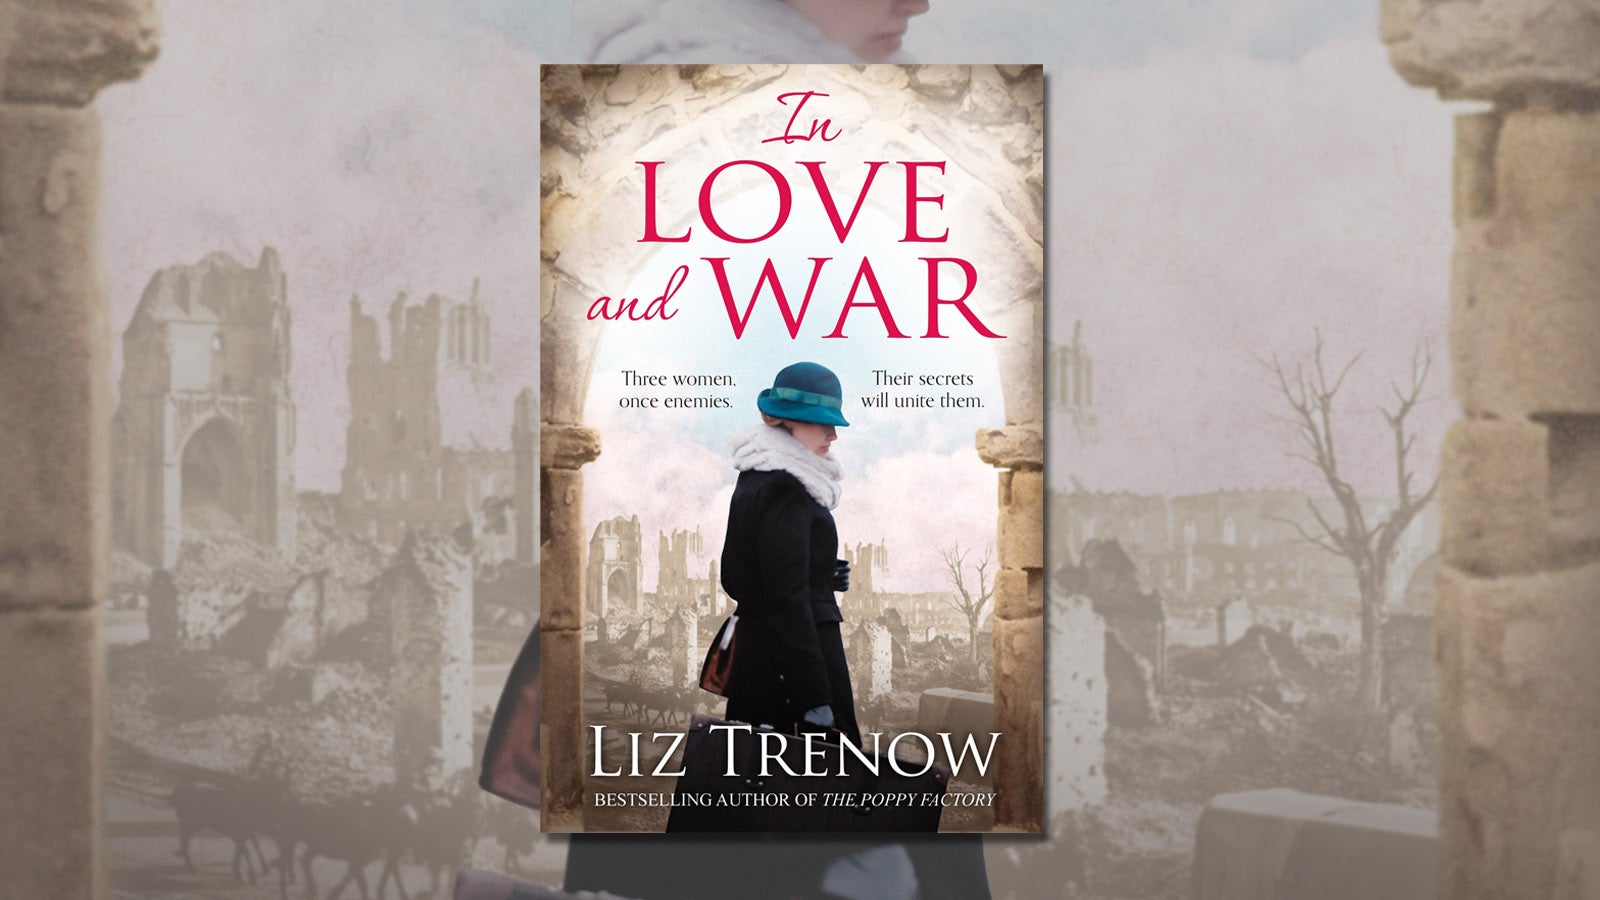 Liz Trenow's In Love and War set against a backdrop of  a war-city in World War 1